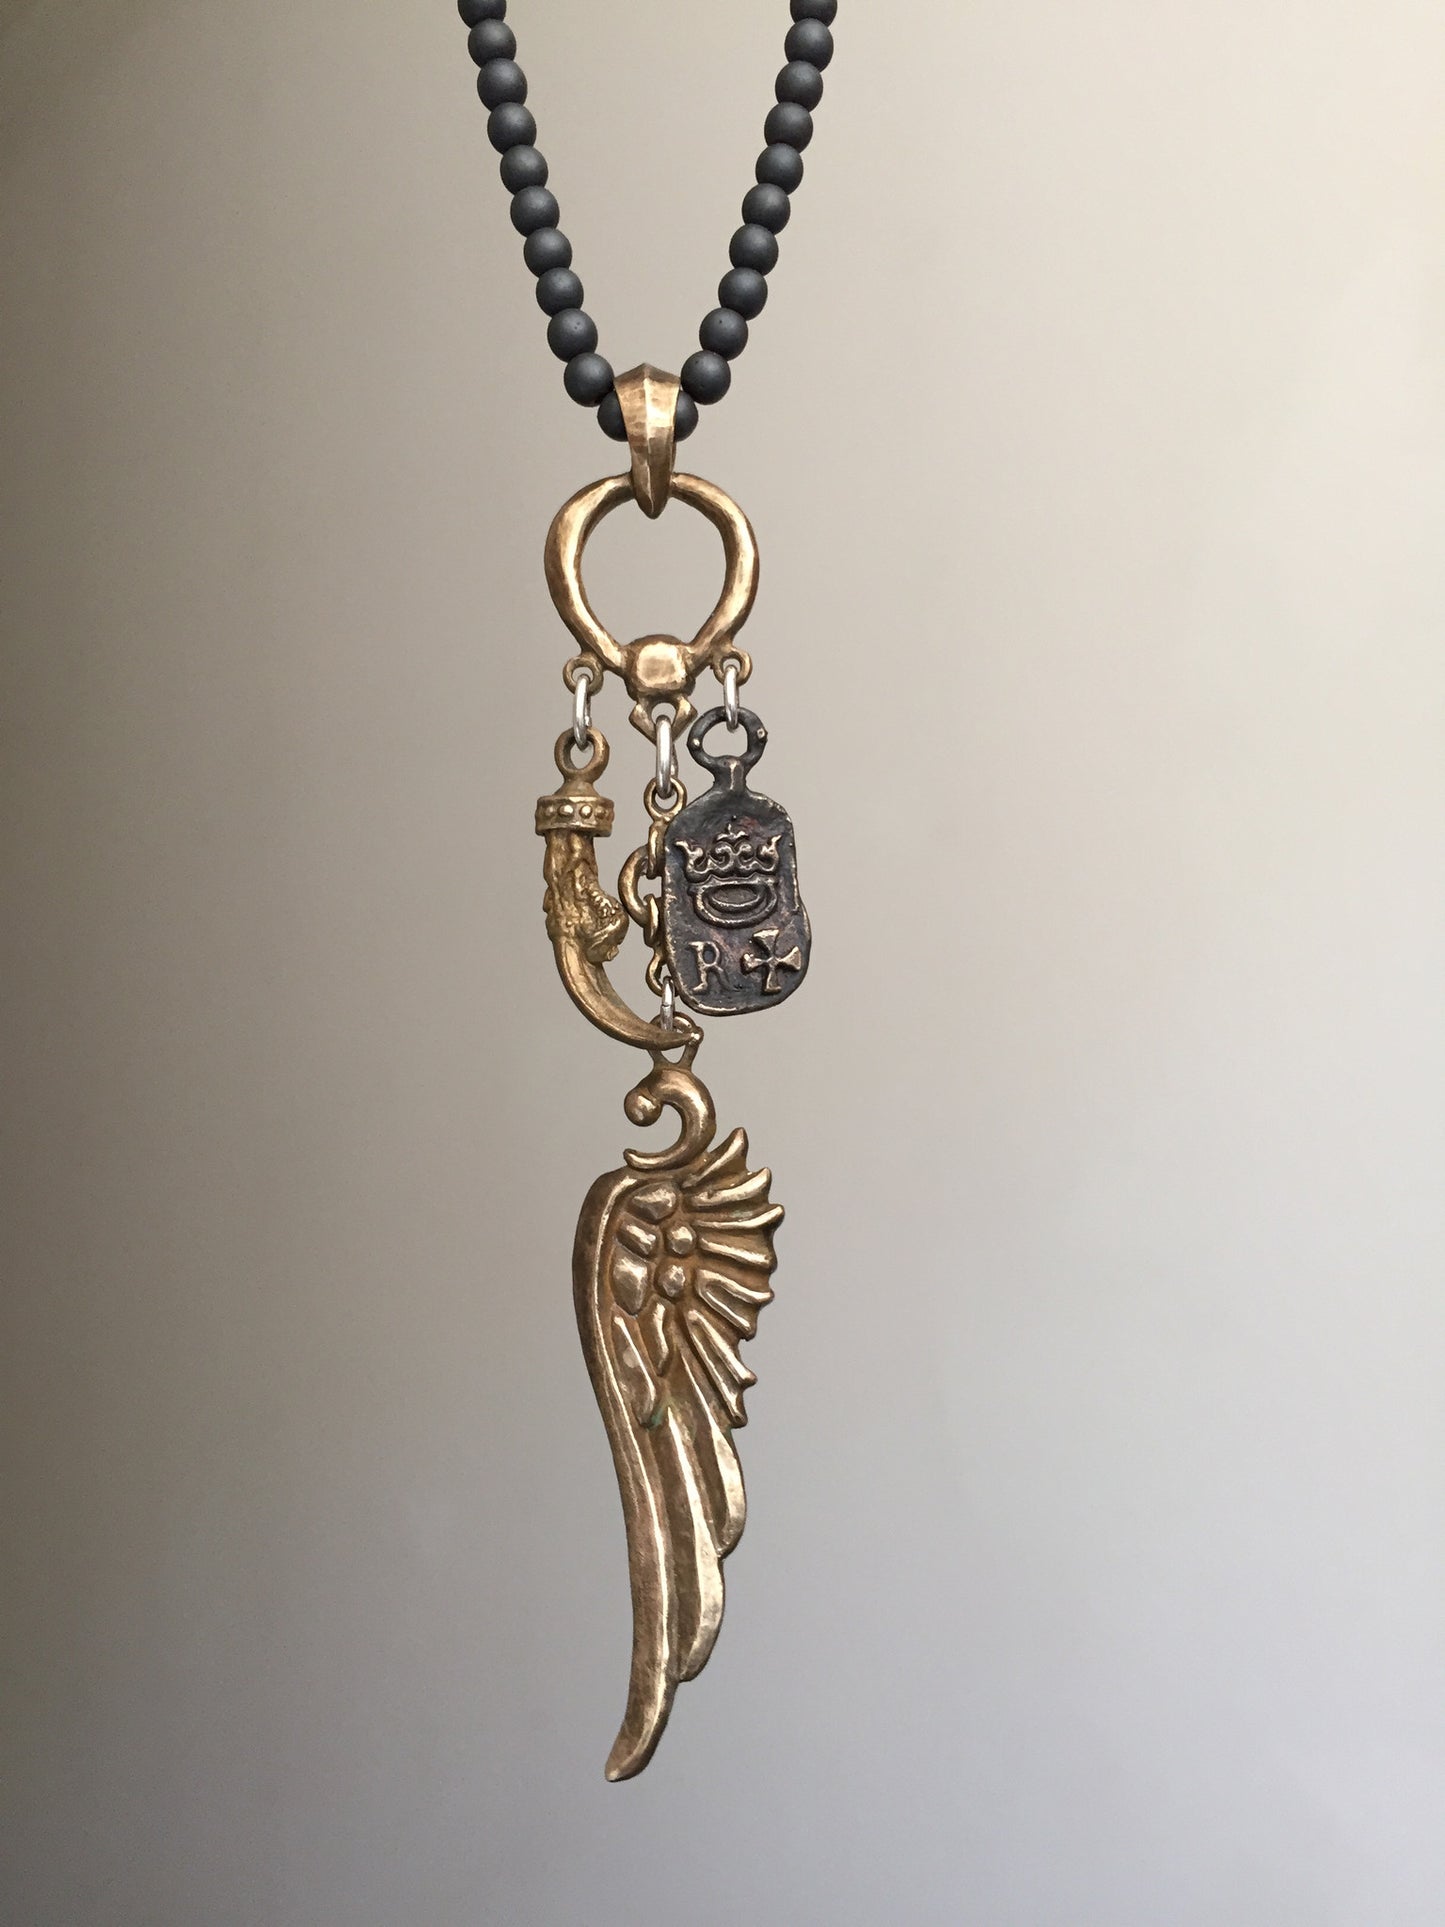 Wing, Clew and Emblem Bronze Art Necklace with Hematite Beads